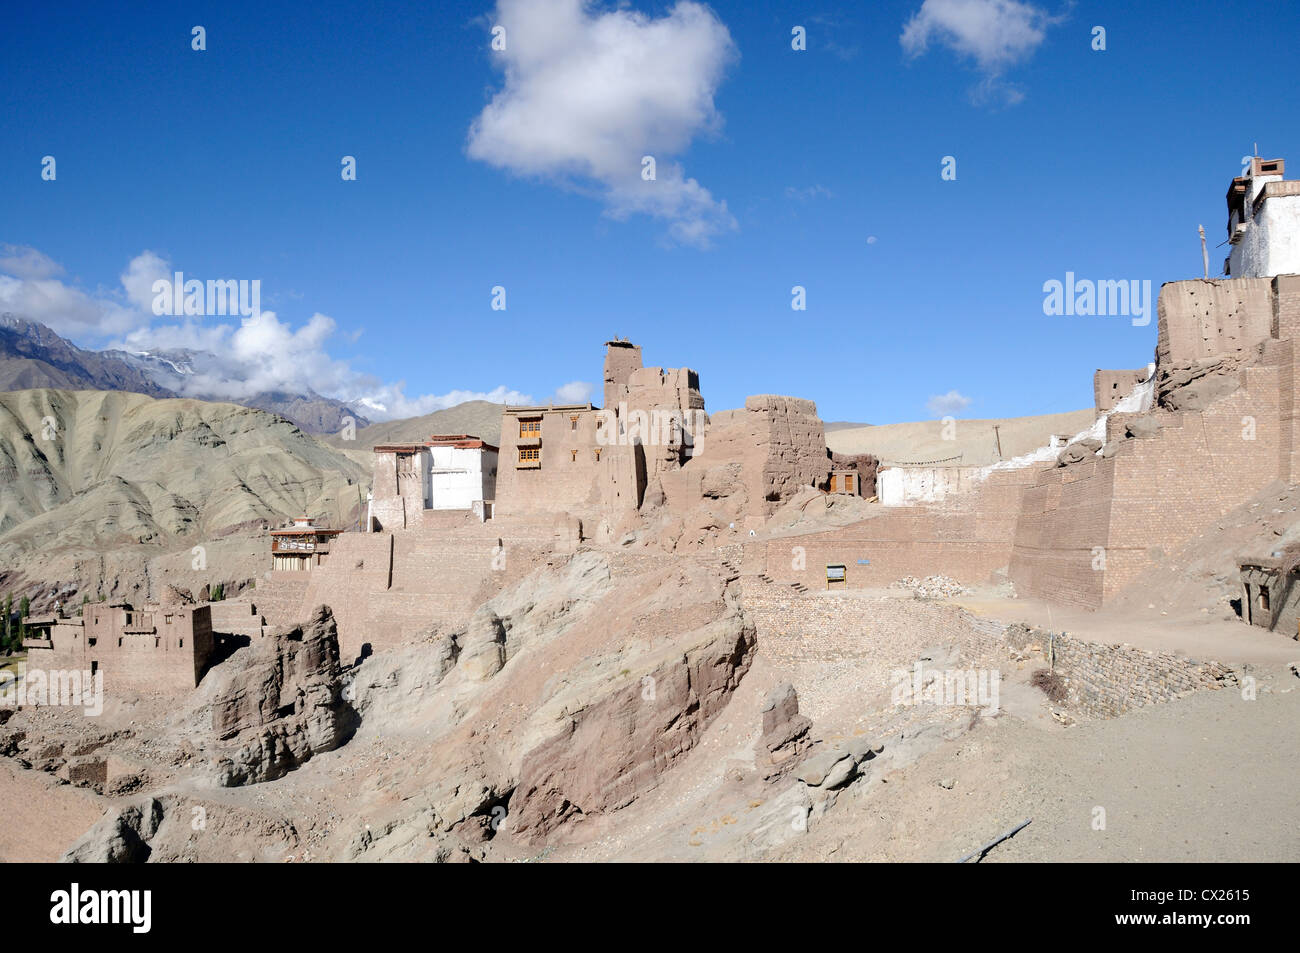 The ruined sixteenth century royal palace and fortress at Basgo with the white Chamba Lhakhang temple. Basgo, Ladakh, India Stock Photo